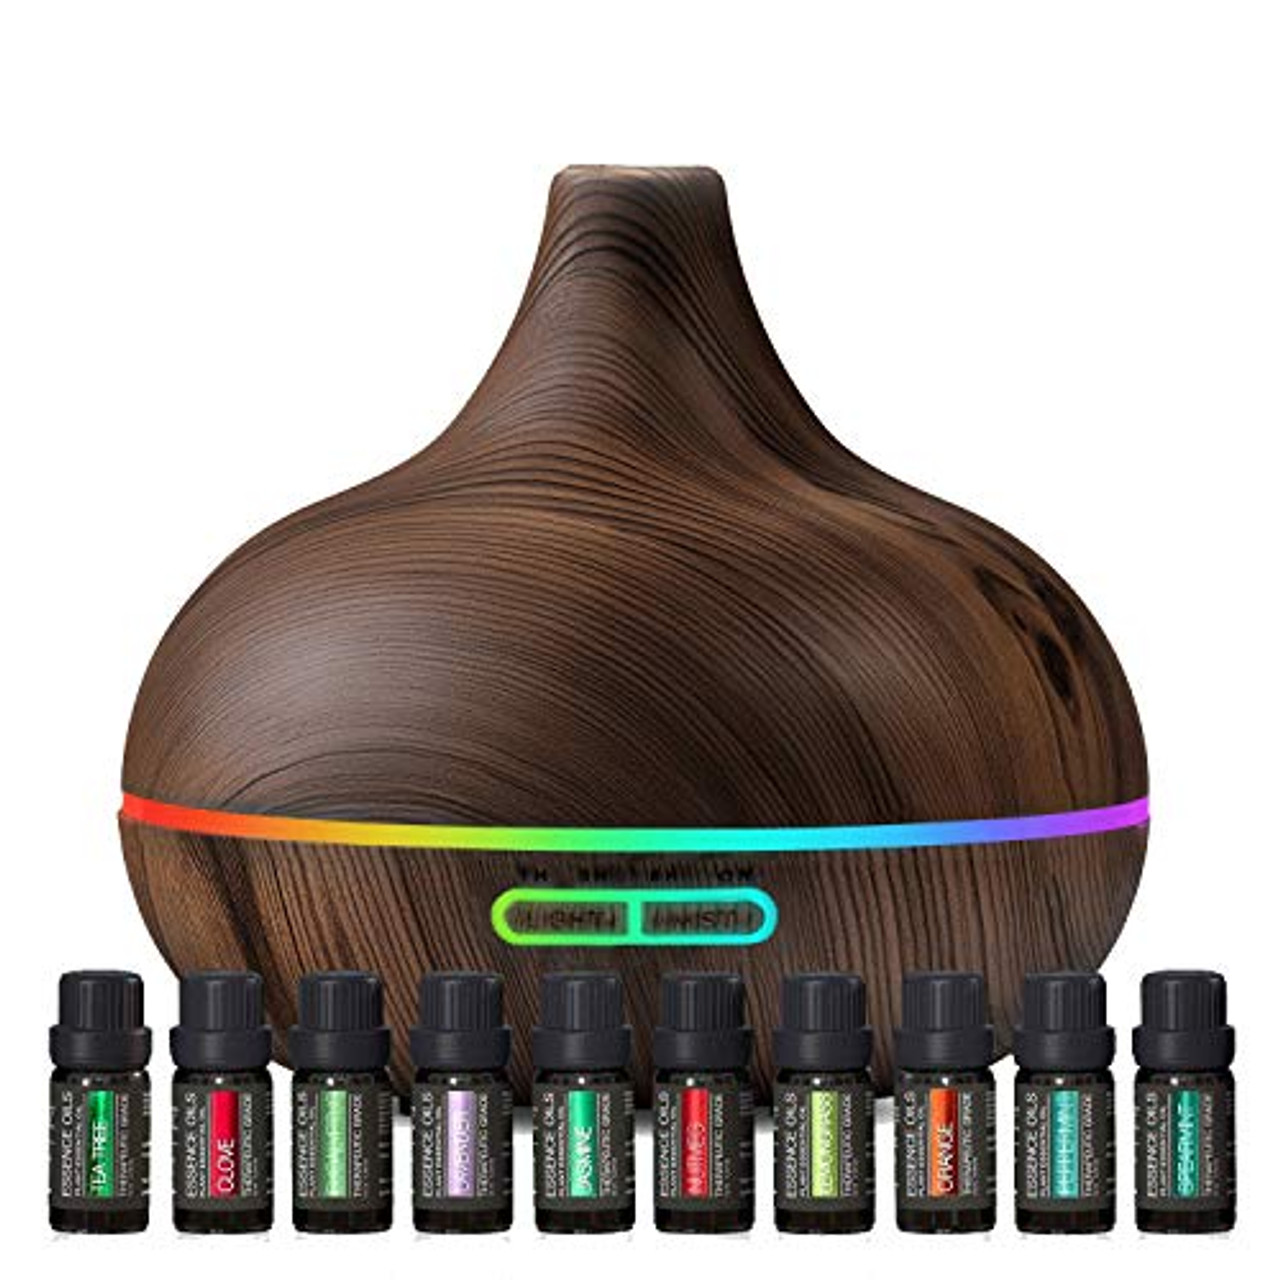 Ultimate Aromatherapy Diffuser & Essential Oil Set - Ultrasonic Diffuser & Top